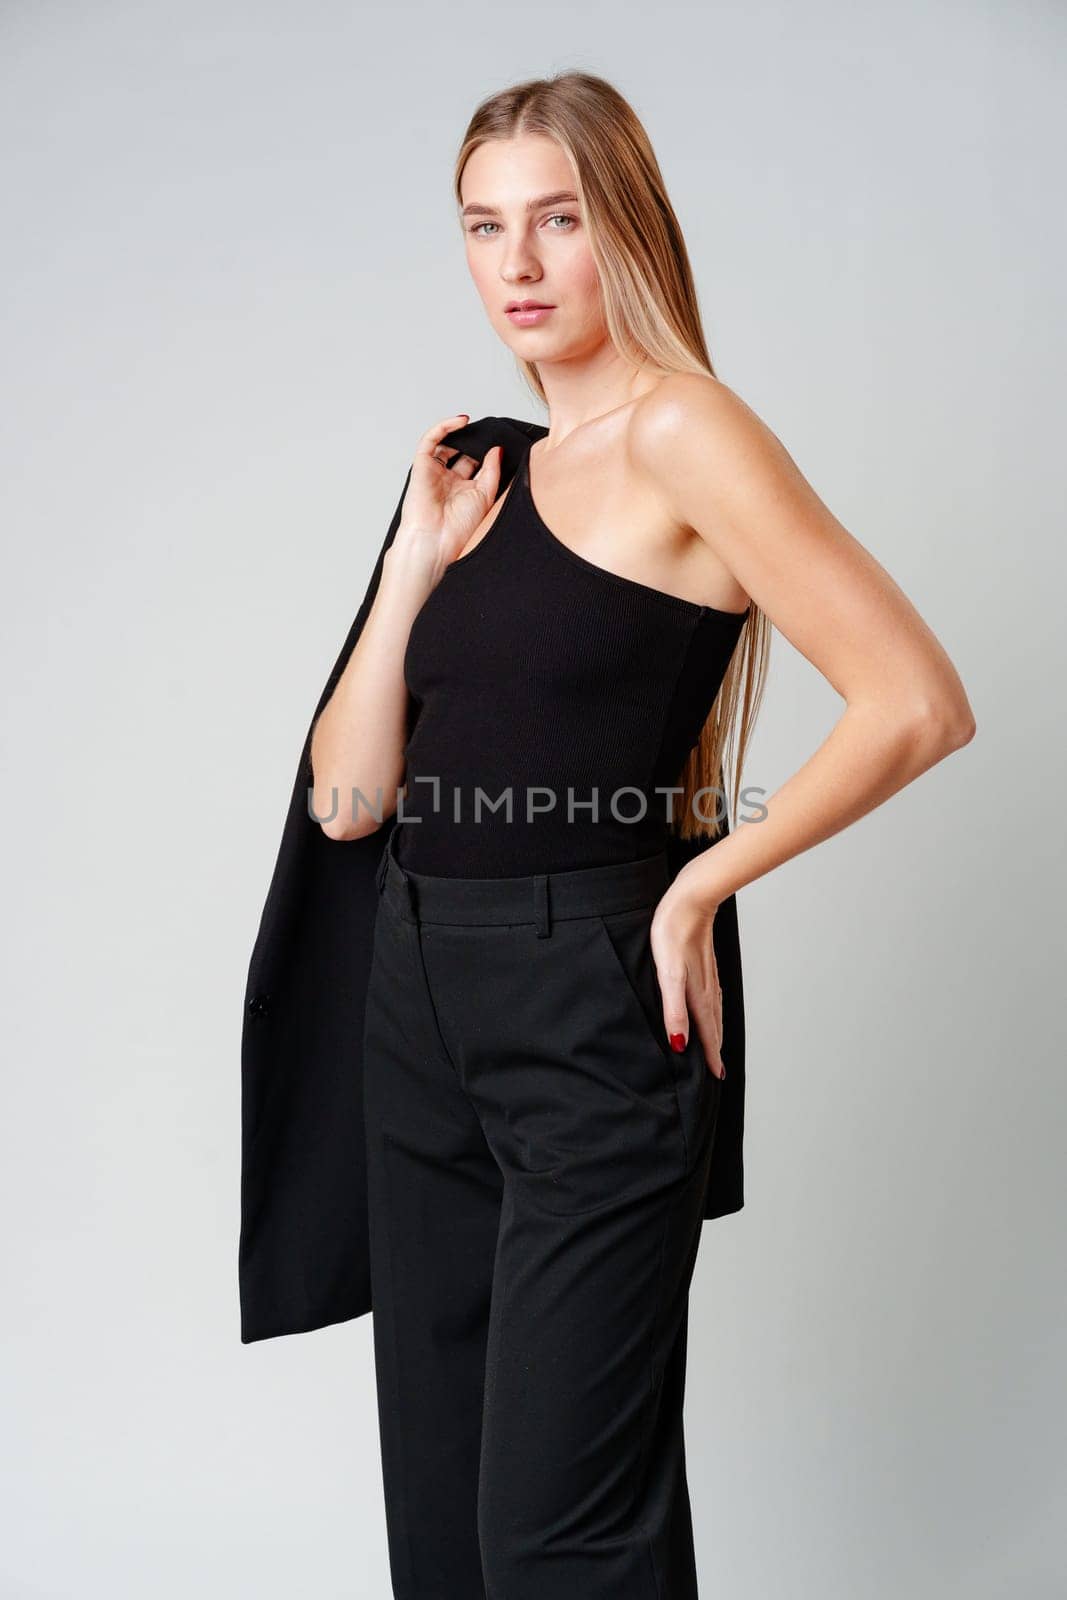 Young Woman Model in Black Top and Pants Posing on gray background by Fabrikasimf